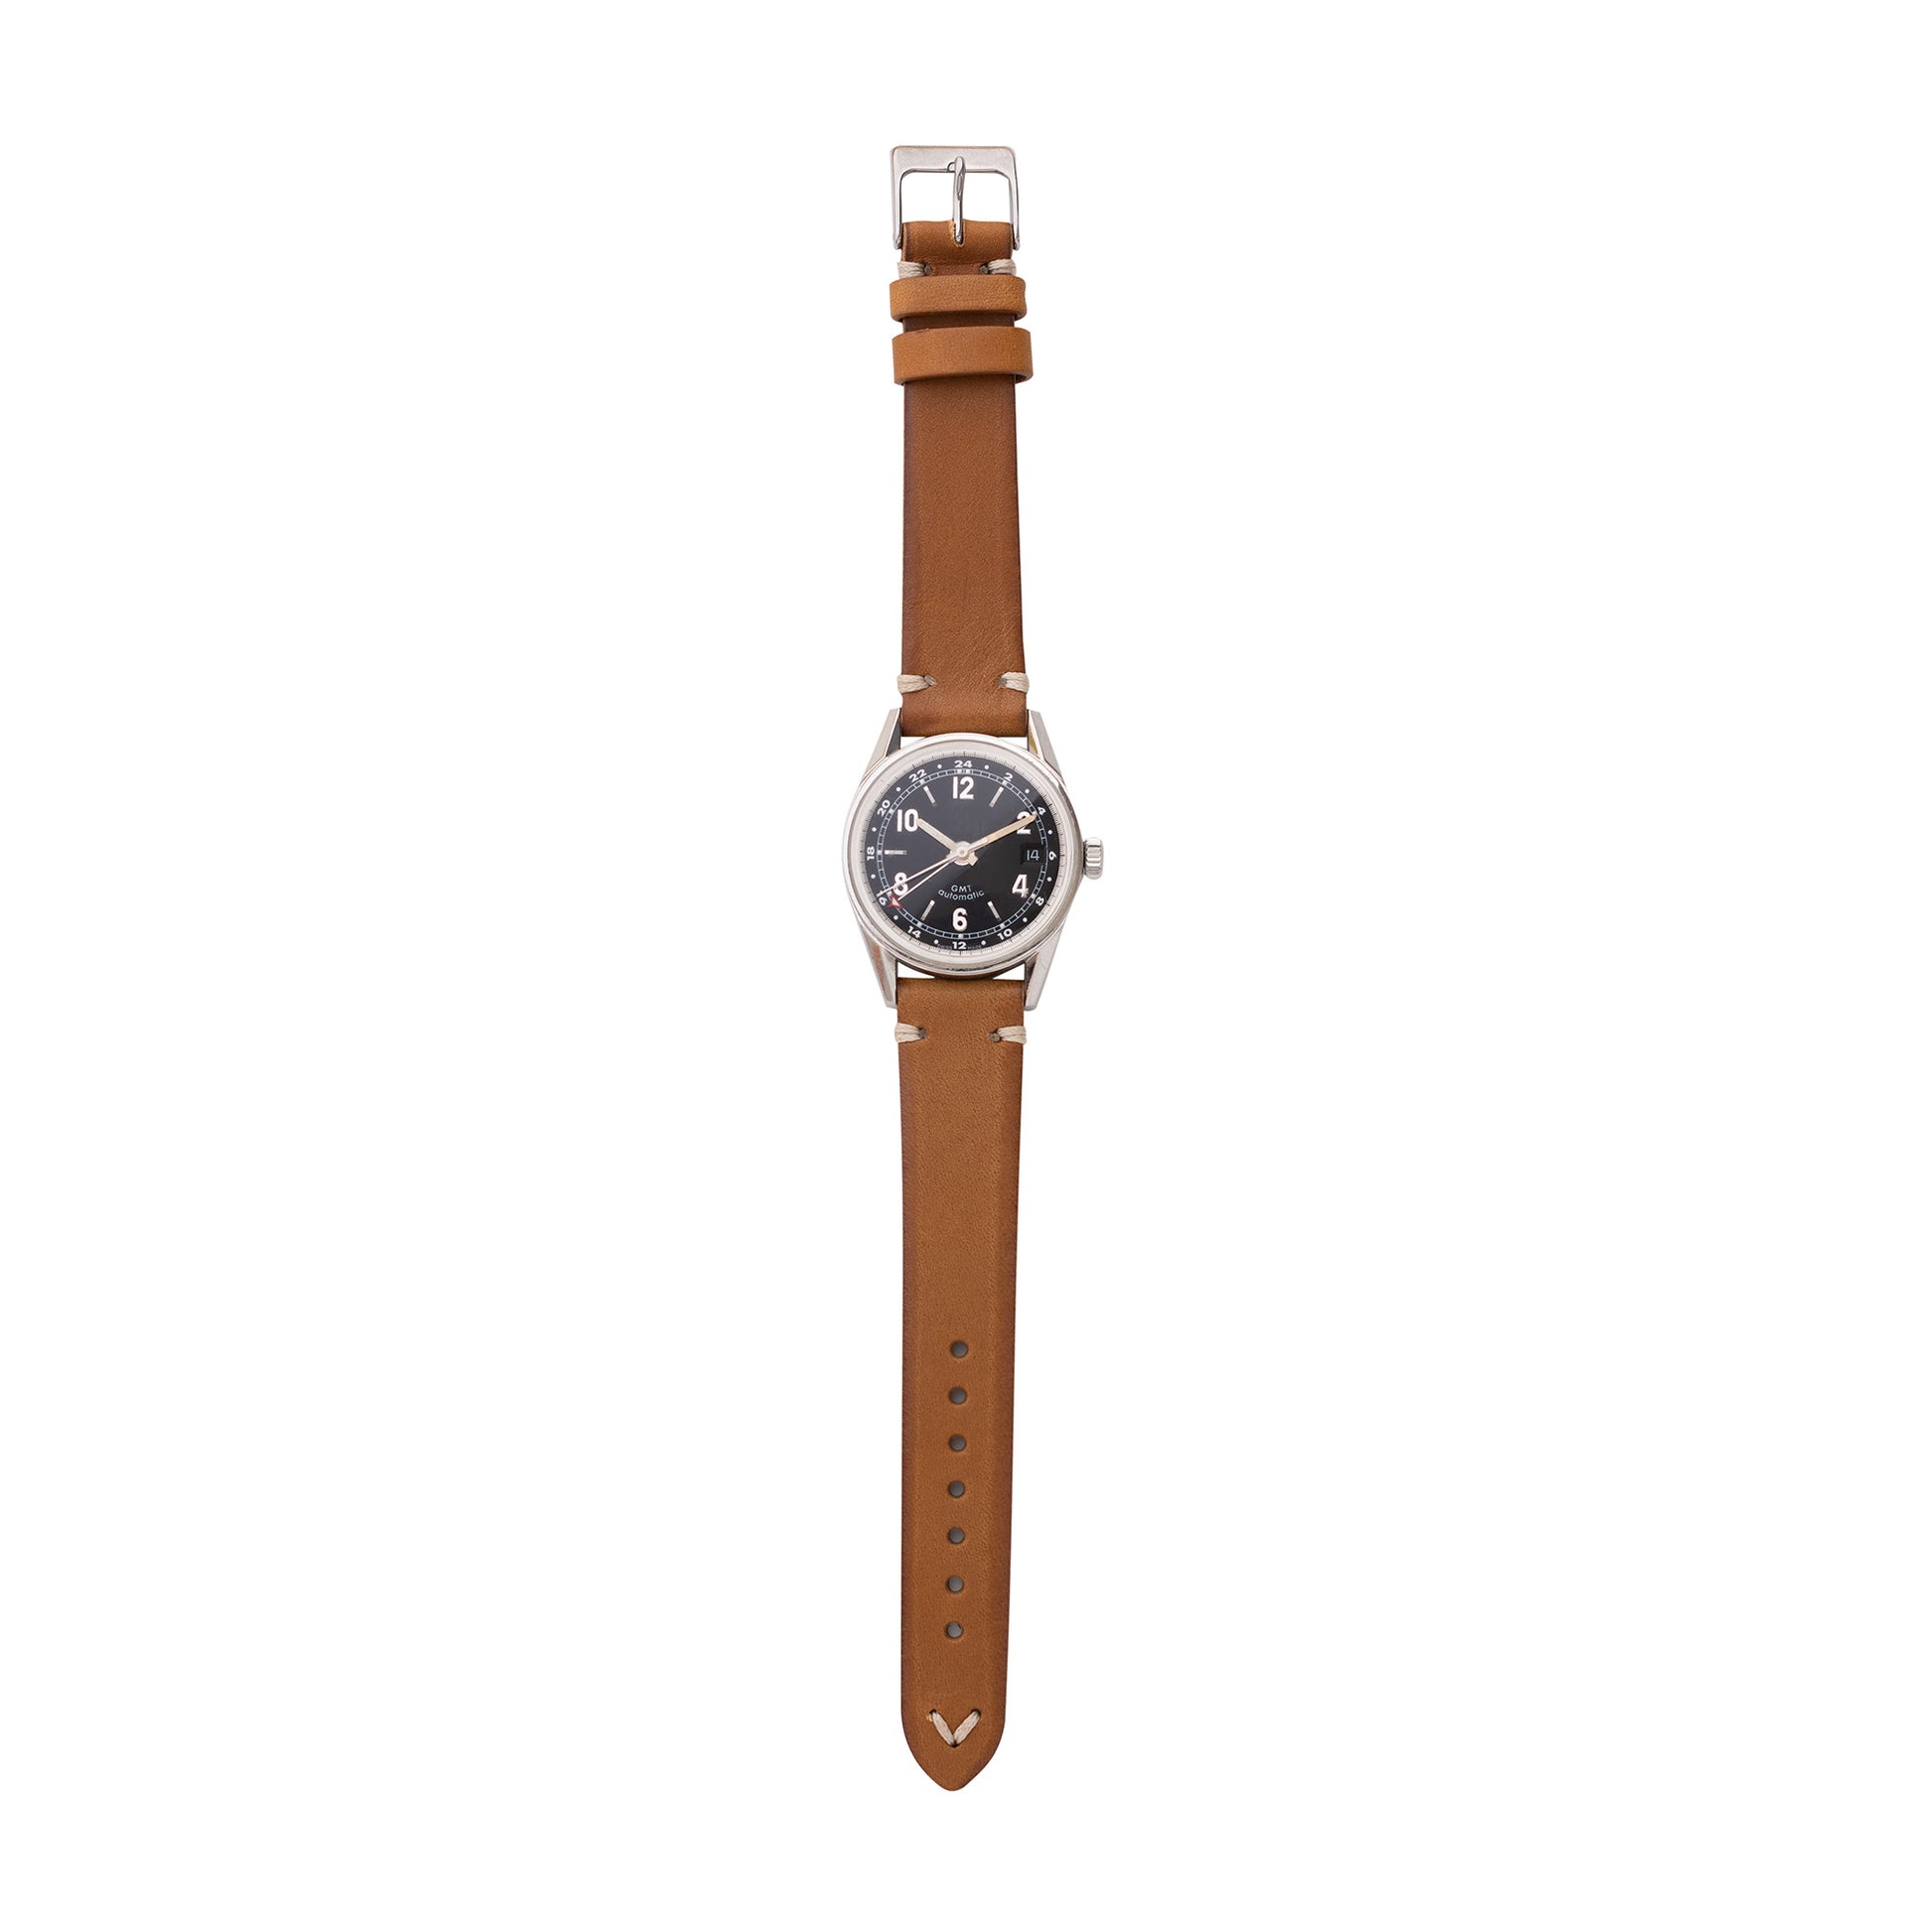 vintage Italian vegetable tanned leather watch strap with watch in saddle tan color by Jackson Wayne